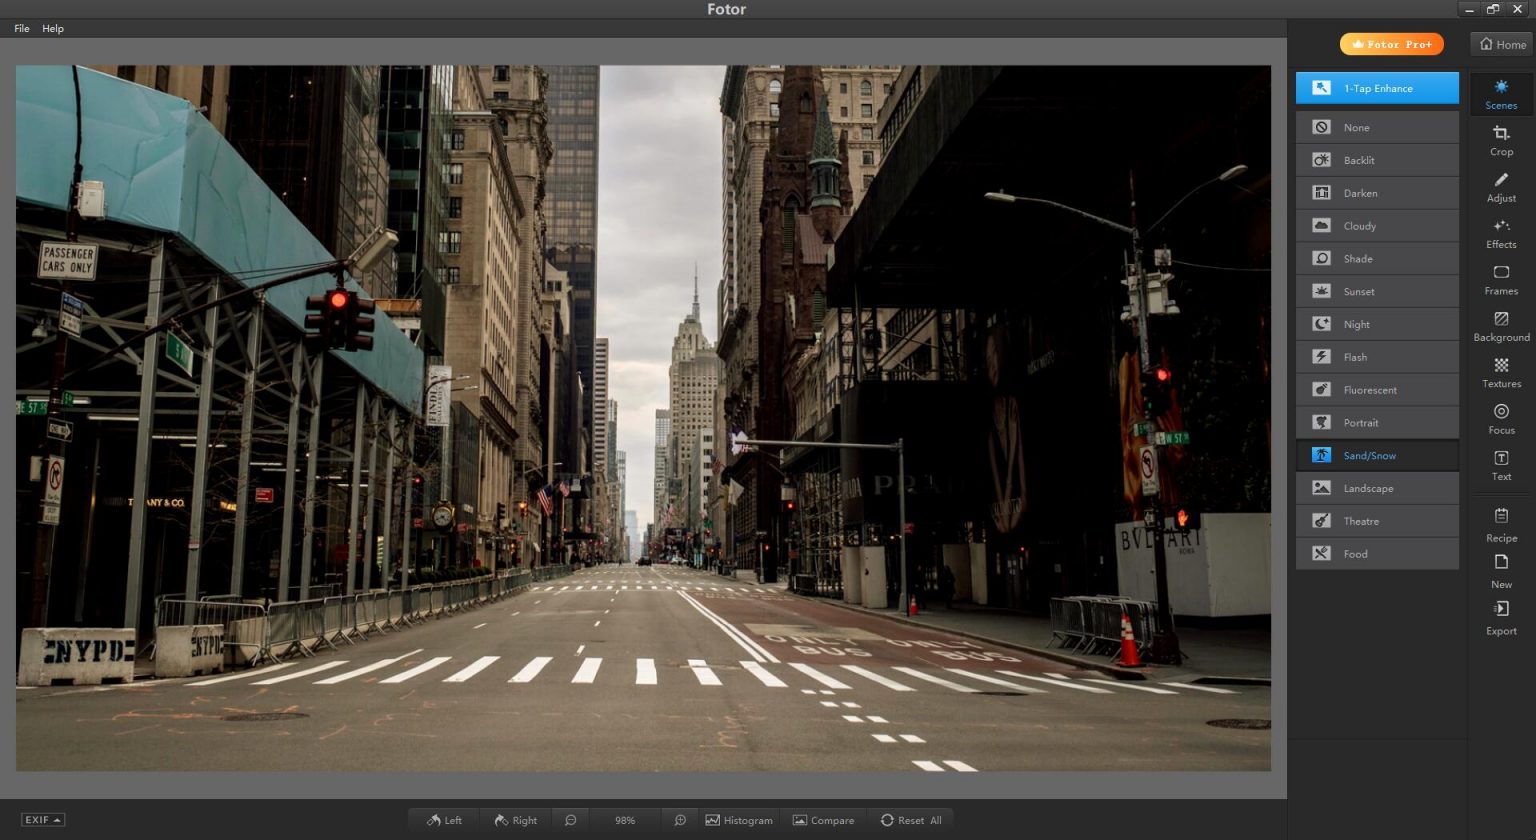 how to extract image from background in fotor photo editor